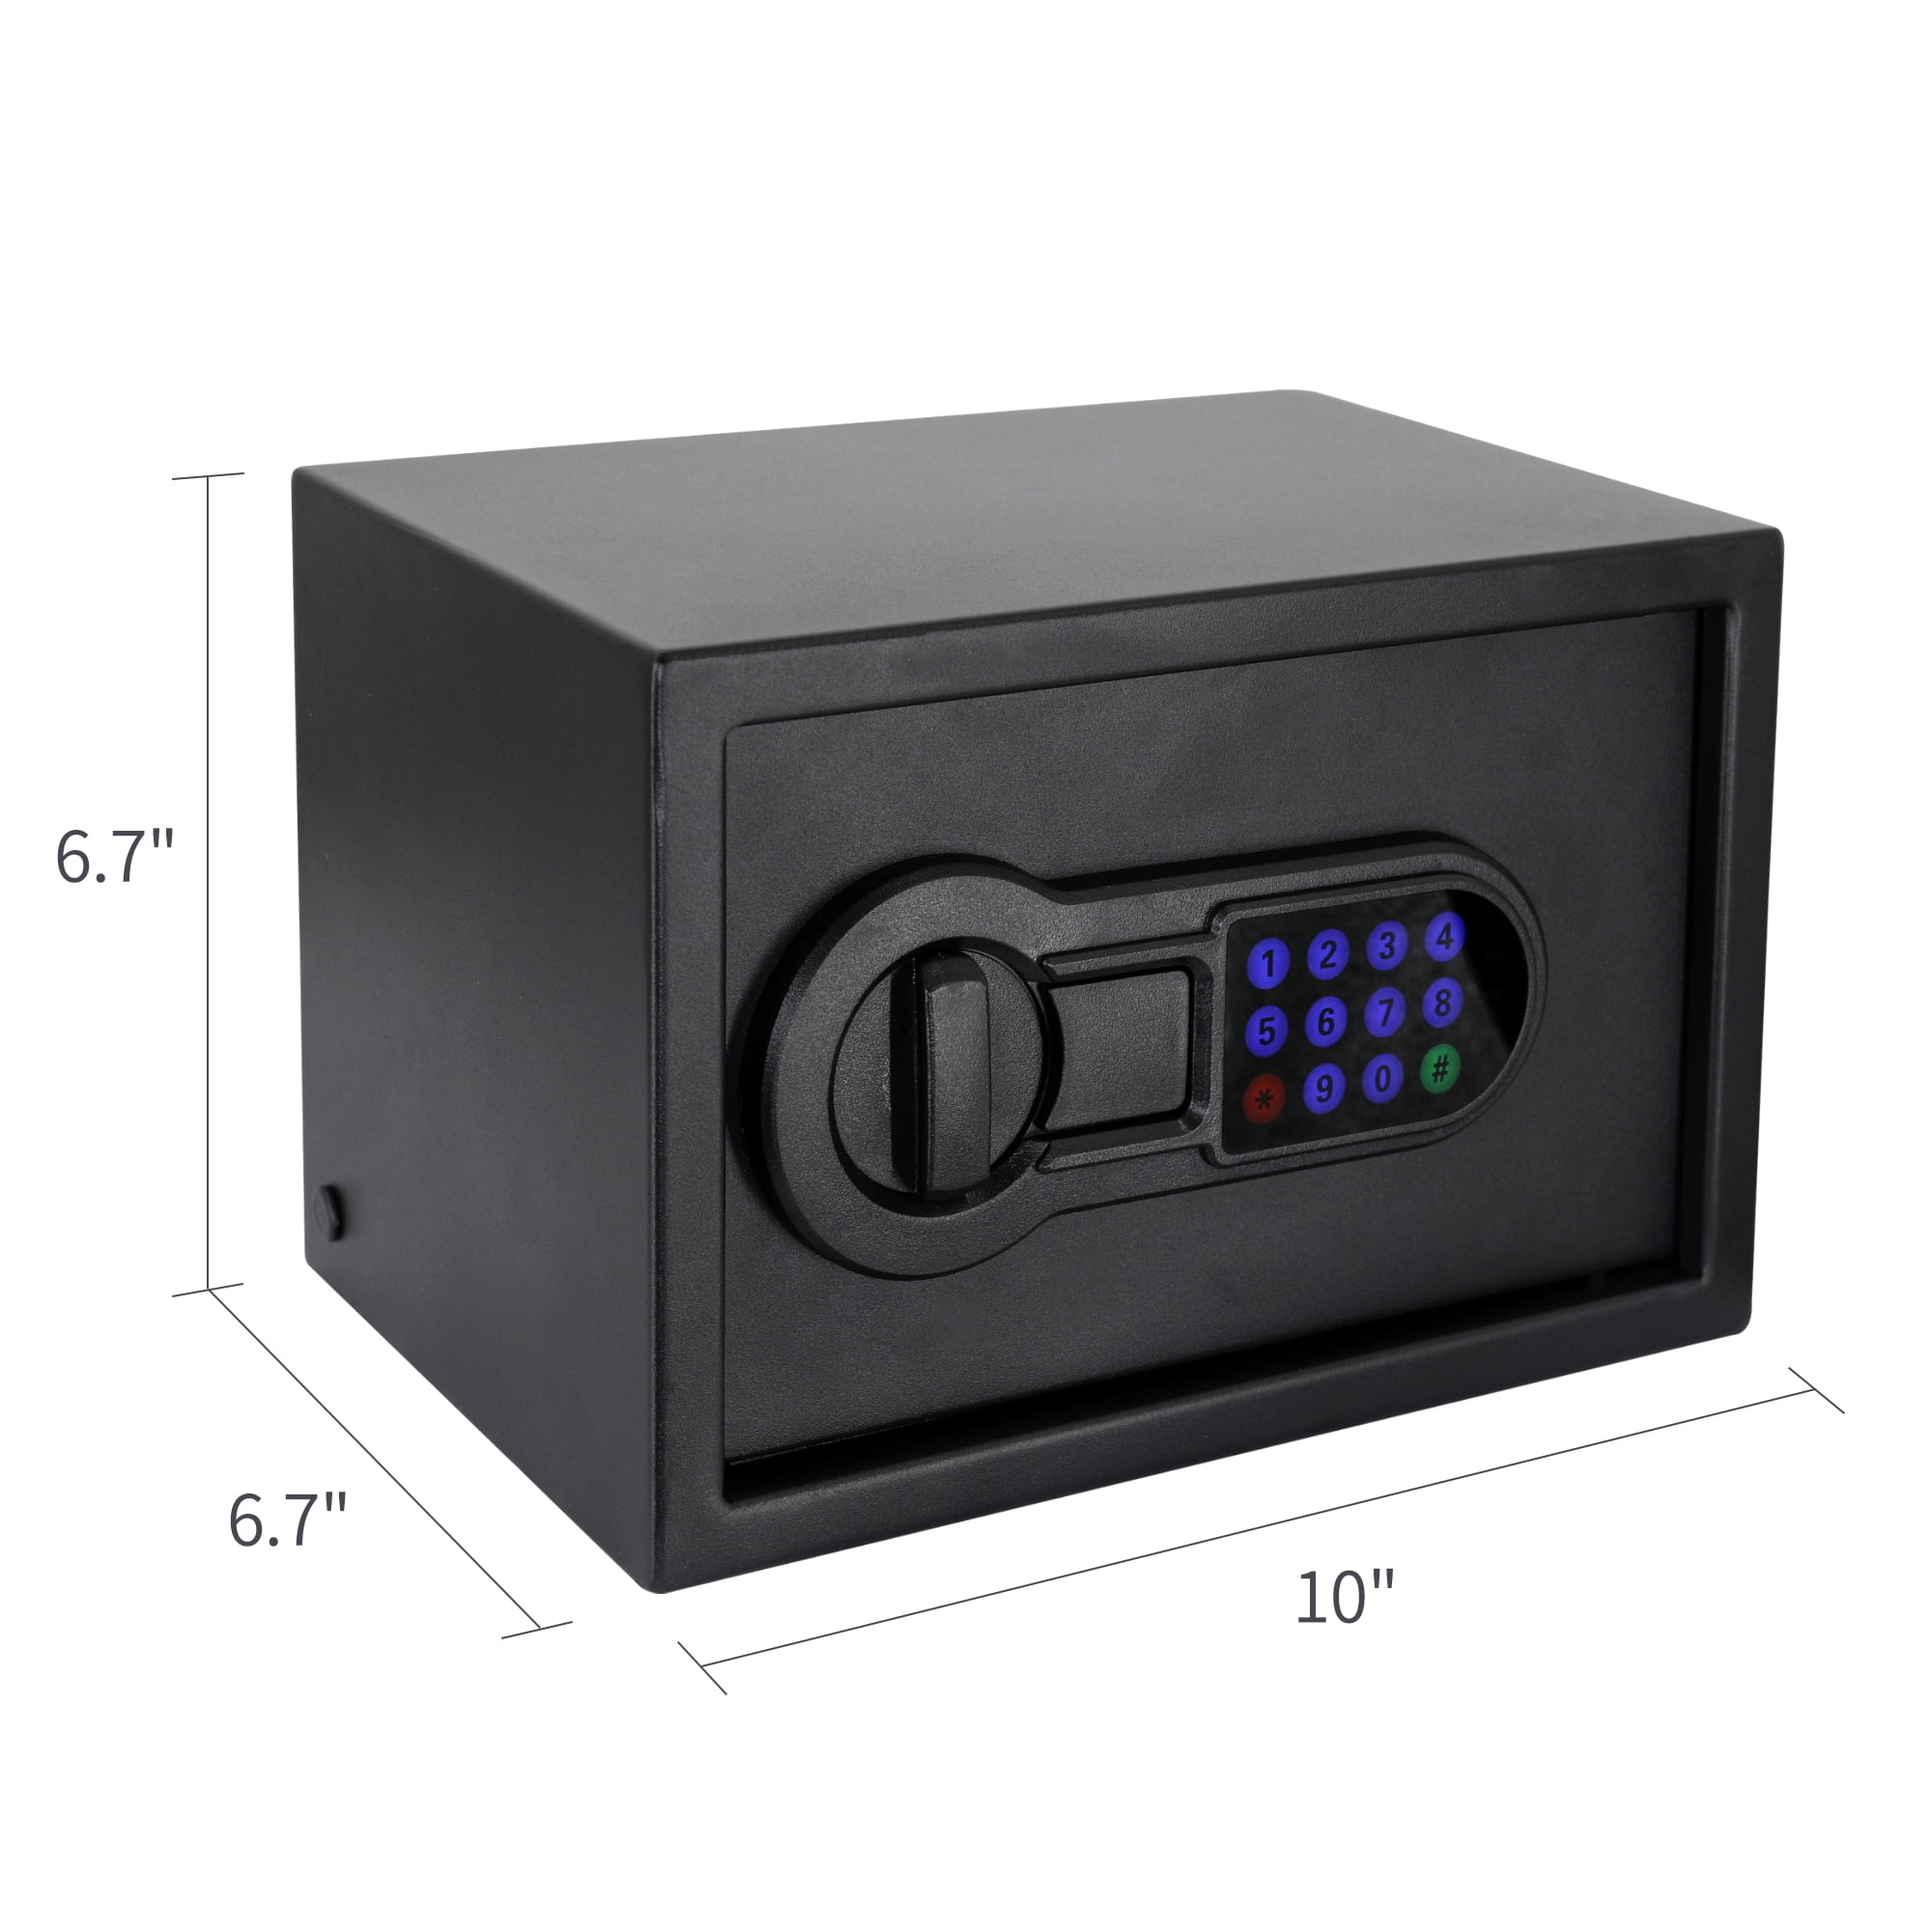 NEW Big Red Safe Lock Made in USA, Individually boxed with changing key 